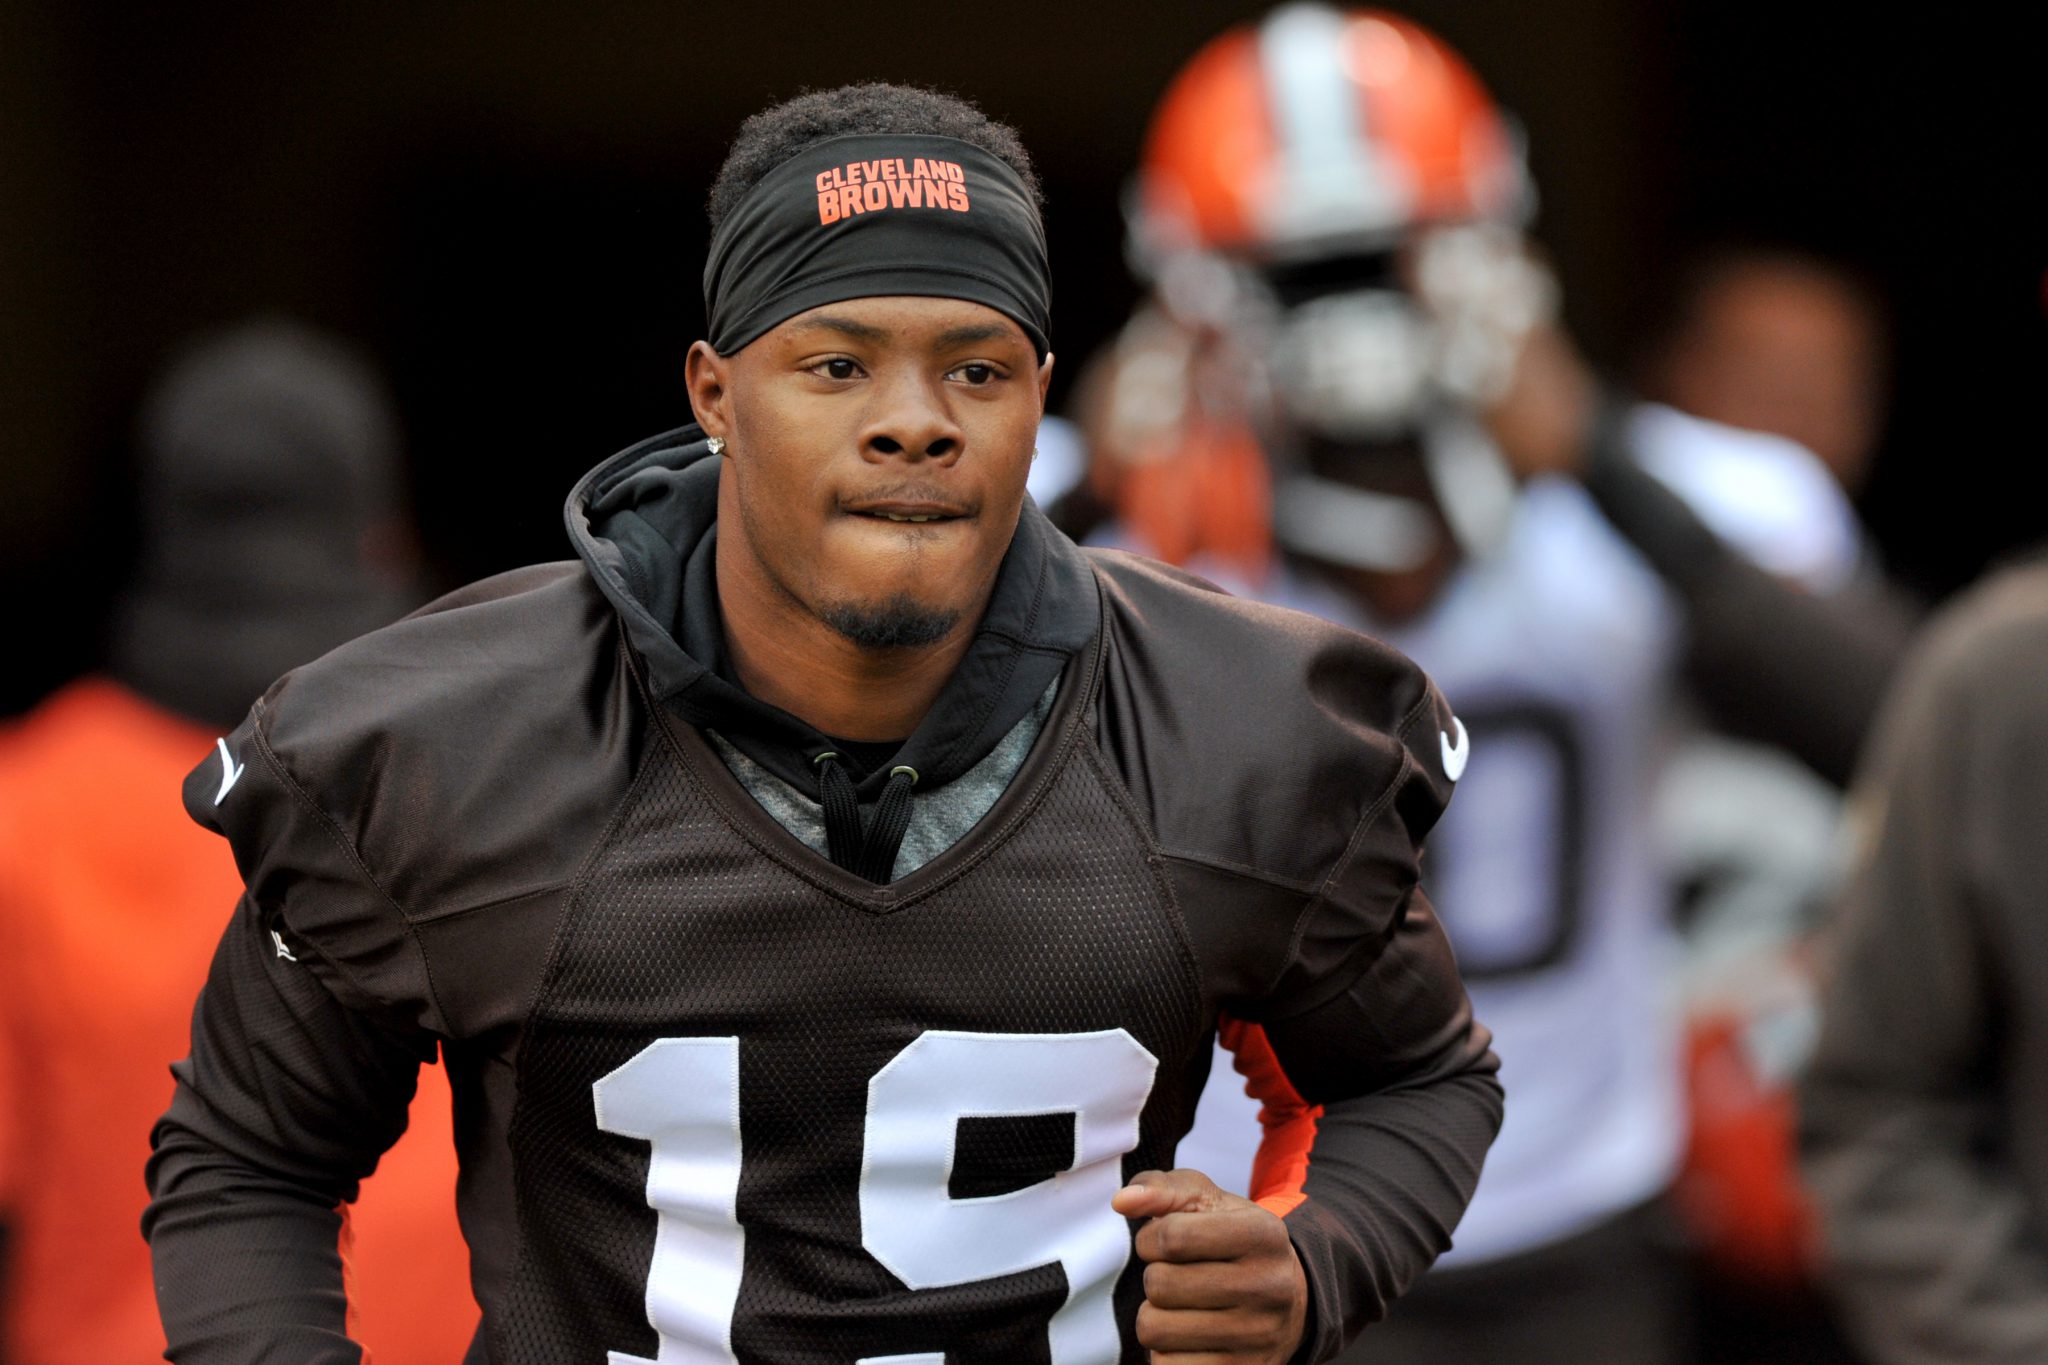 VOTE Browns Wide Receiver Corey Coleman For Pepsi Rookie Of The Week